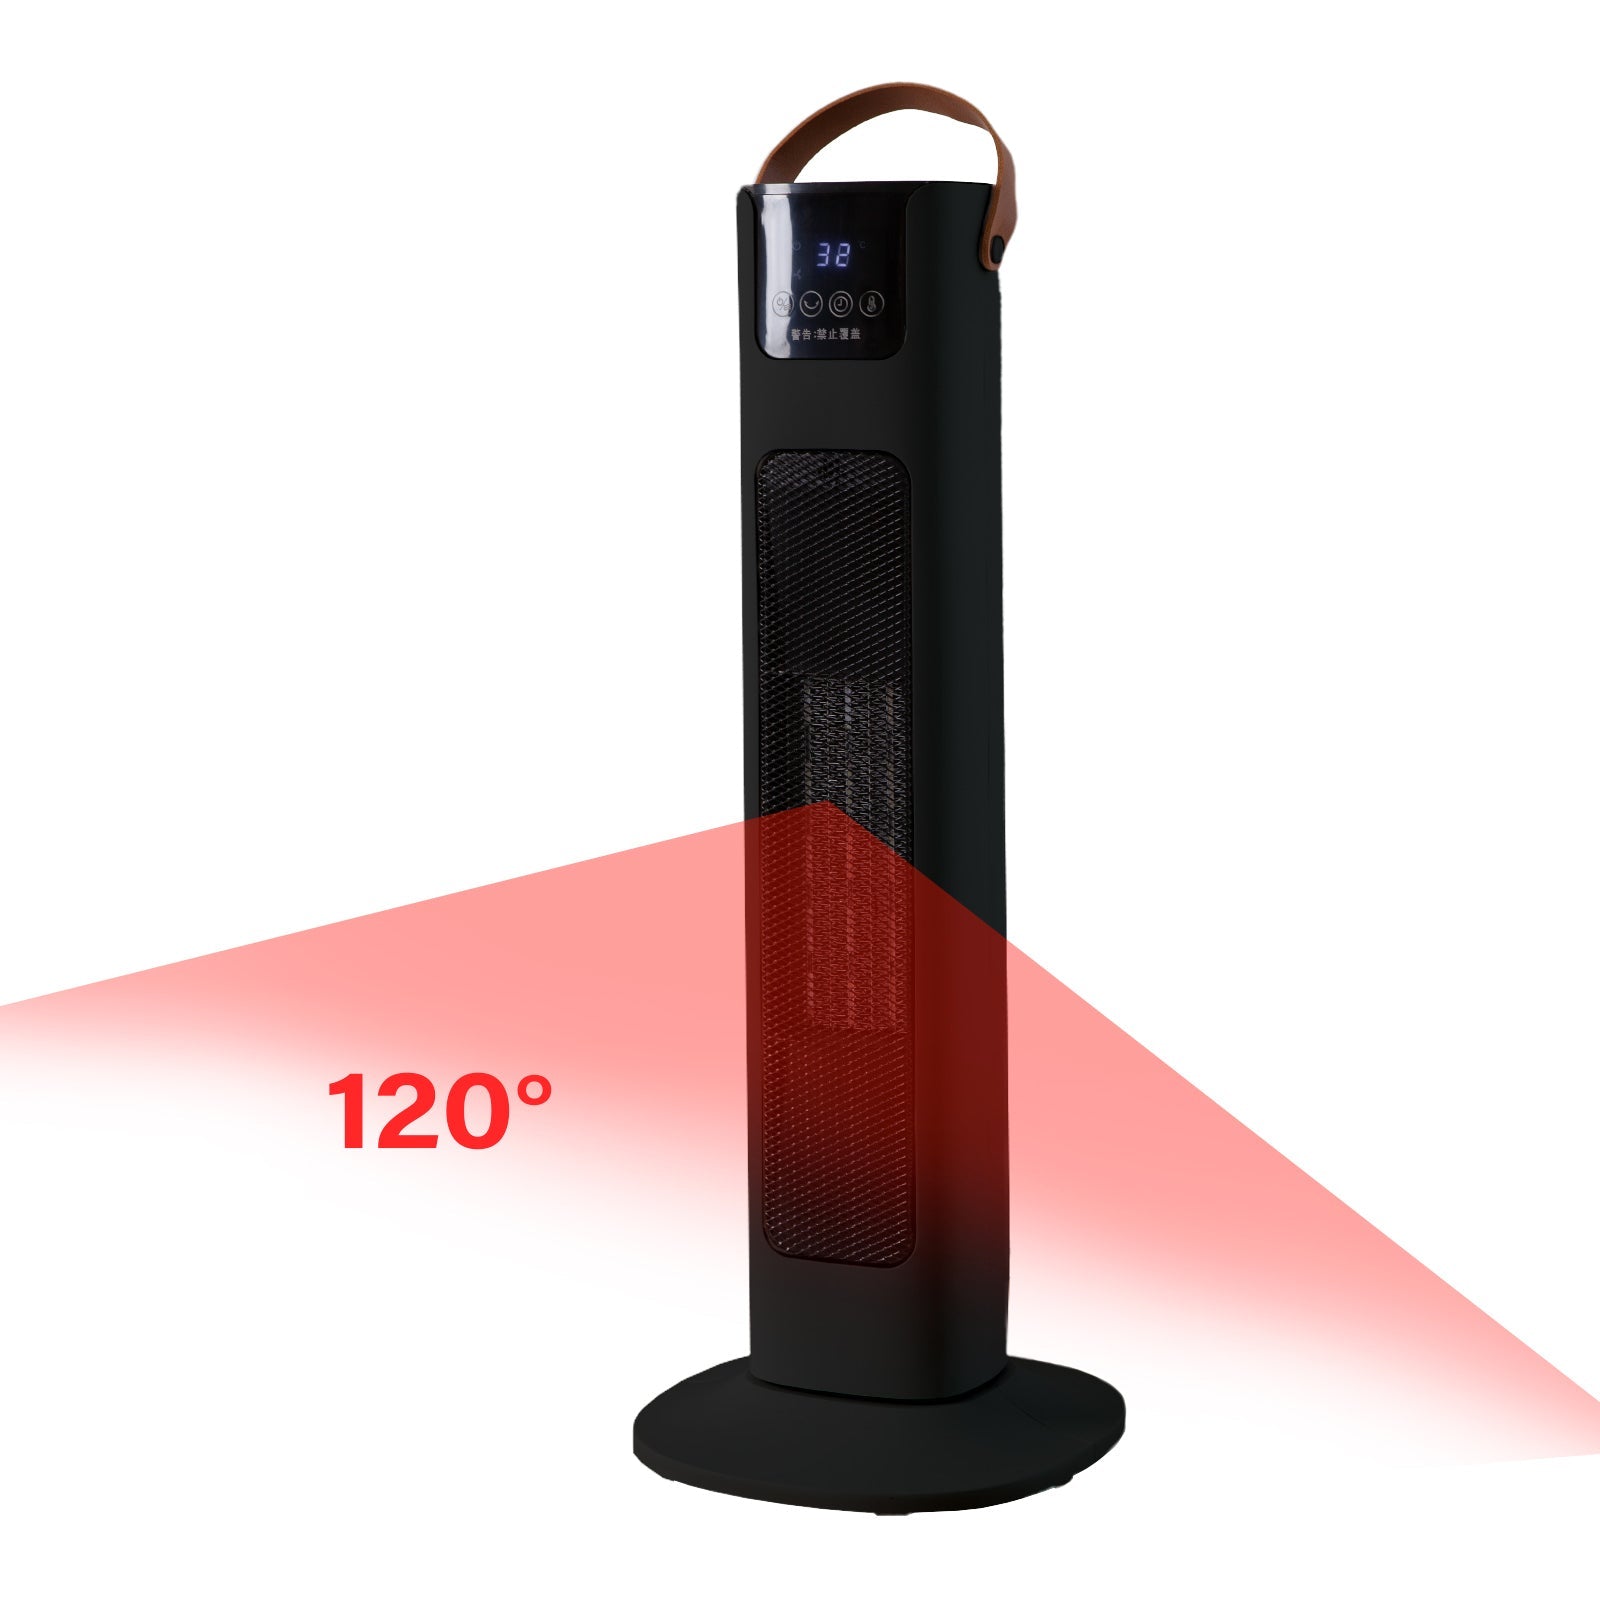 Electric Ceramic Tower Heater Remote Control Portable OVanting Black